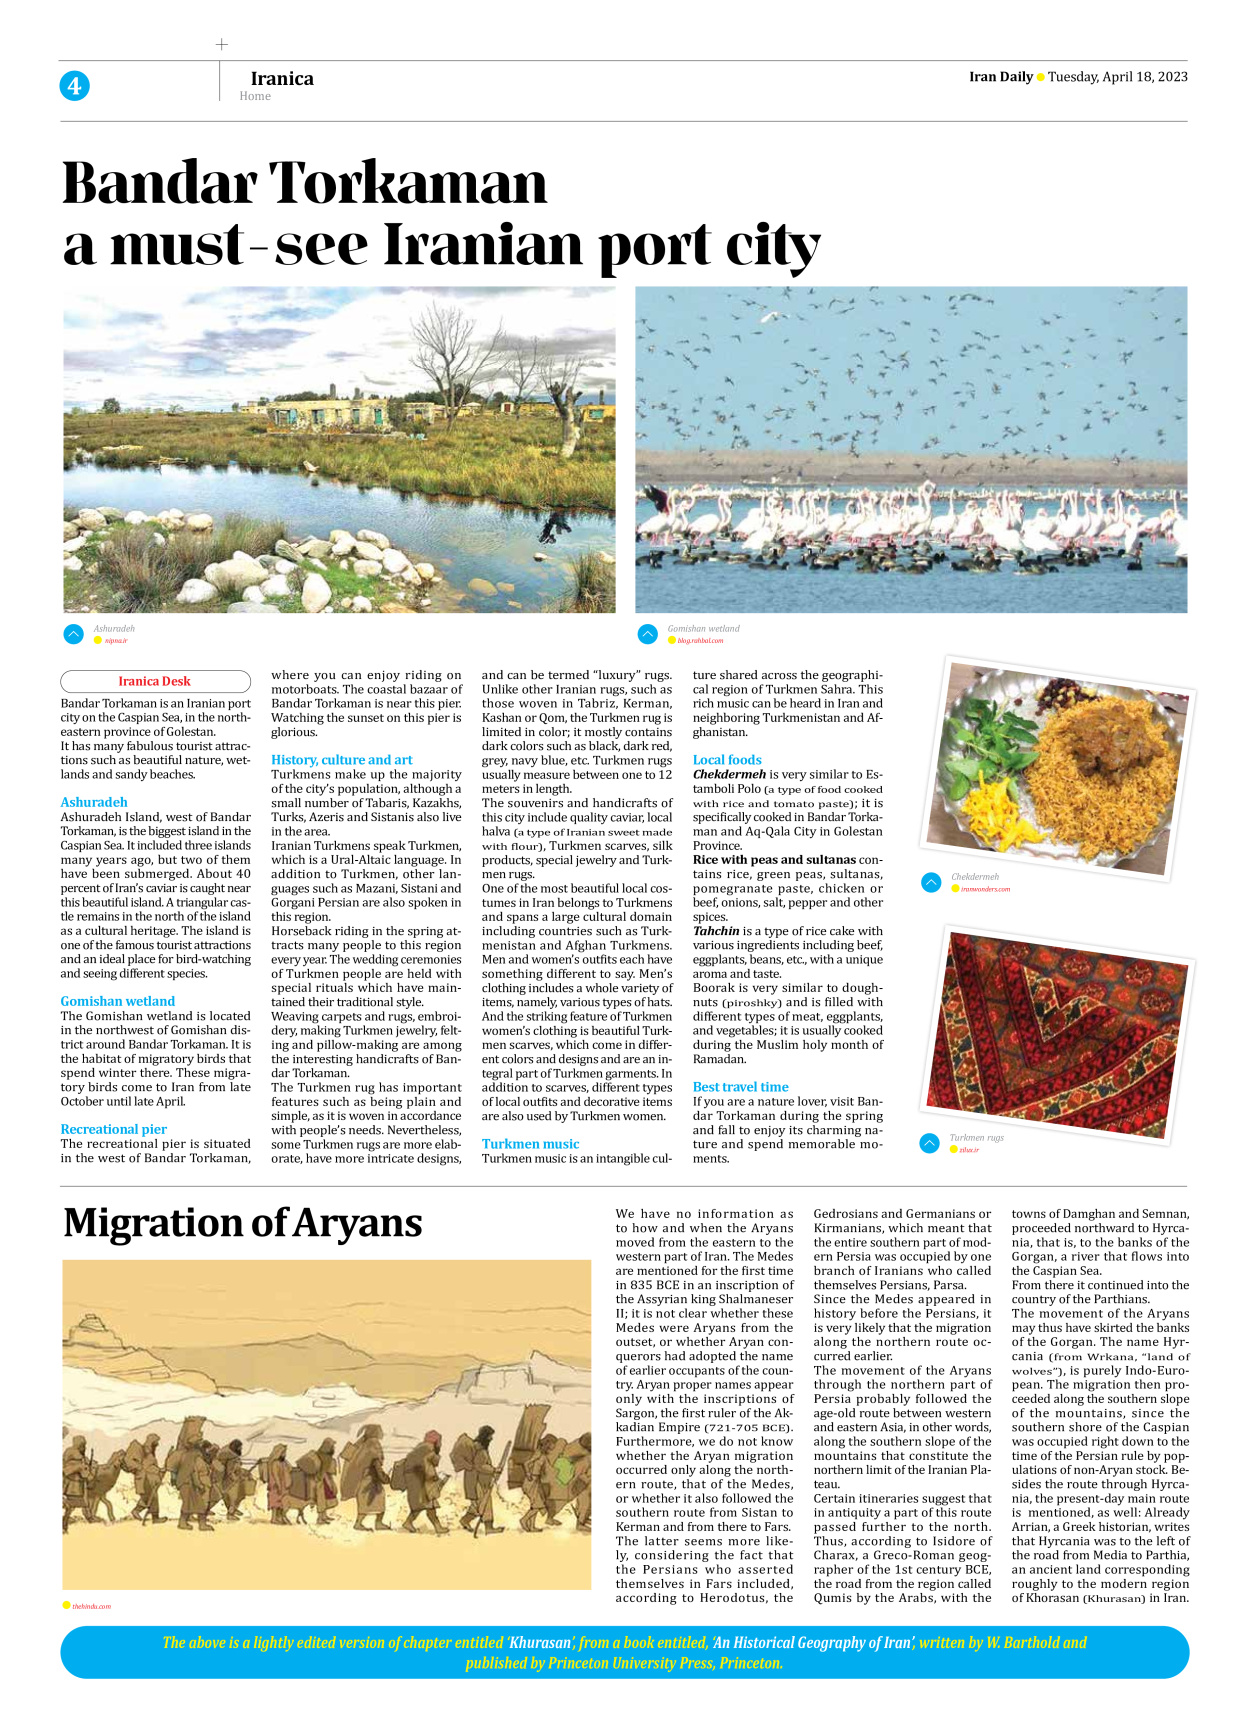 Iran Daily - Number Seven Thousand Two Hundred and Seventy One - 18 April 2023 - Page 4